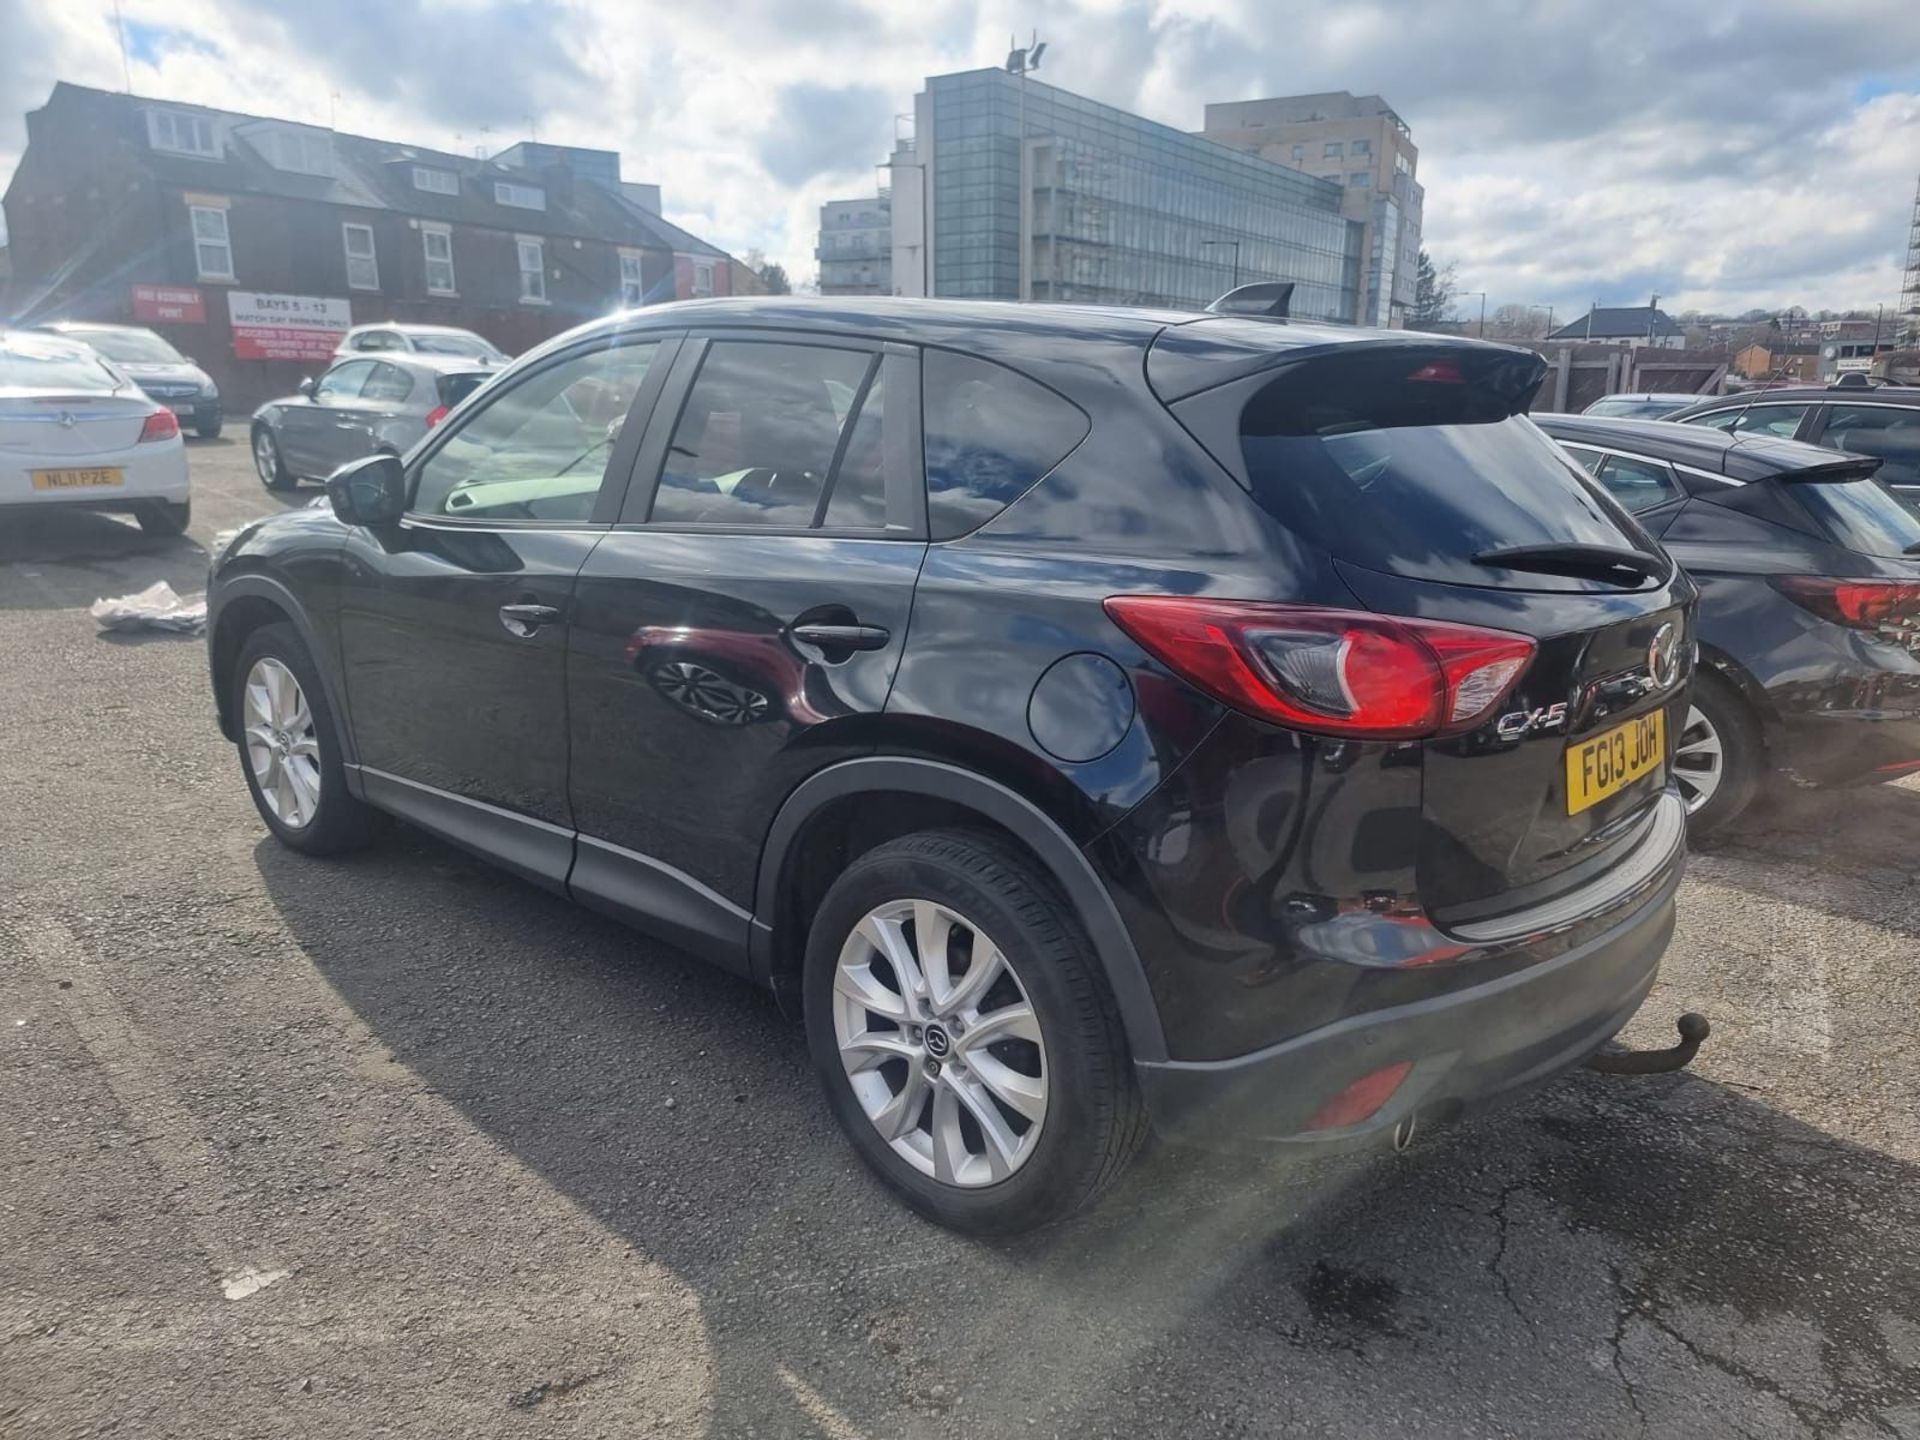 FG13 JOH MAZDA CX-5 2.2 D 150 SPORT 2WD Station Wagon. Comes with 1 key. Date of registration: 21/ - Image 4 of 9